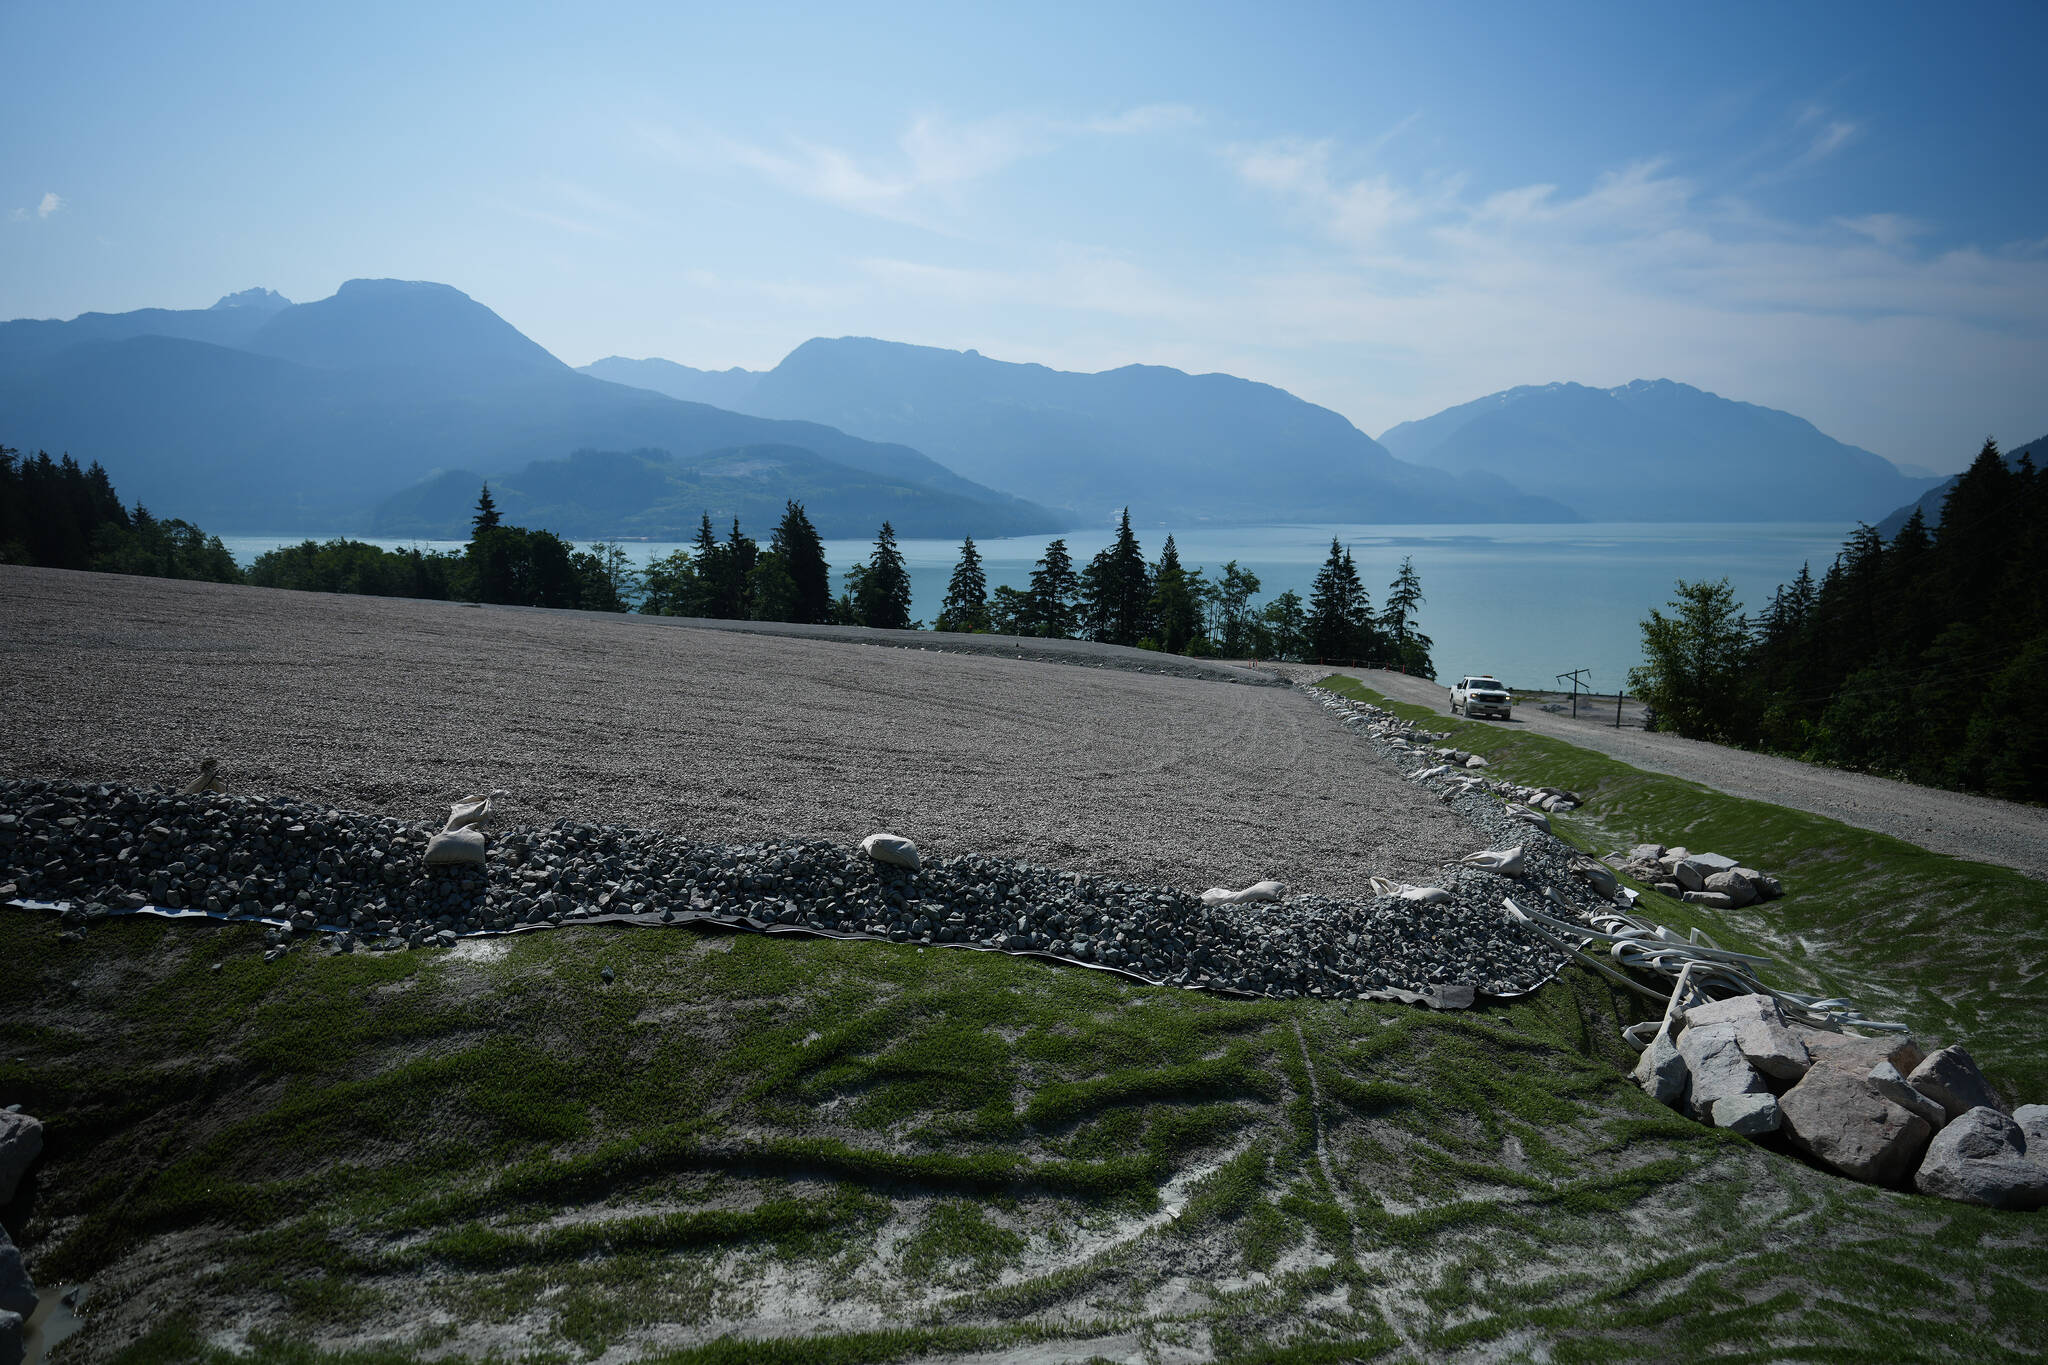 A worker drives past a former landfill undergoing remediation at the Woodfibre LNG export terminal site on Howe Sound, as work continues to prepare for construction, in Squamish, B.C., Wednesday, July 5, 2023. Construction is expected to begin later this year on the liquefied natural gas export facility which is being built on the site that was used as a pulp and paper operation for nearly 100 years before closing in 2006. THE CANADIAN PRESS/Darryl Dyck